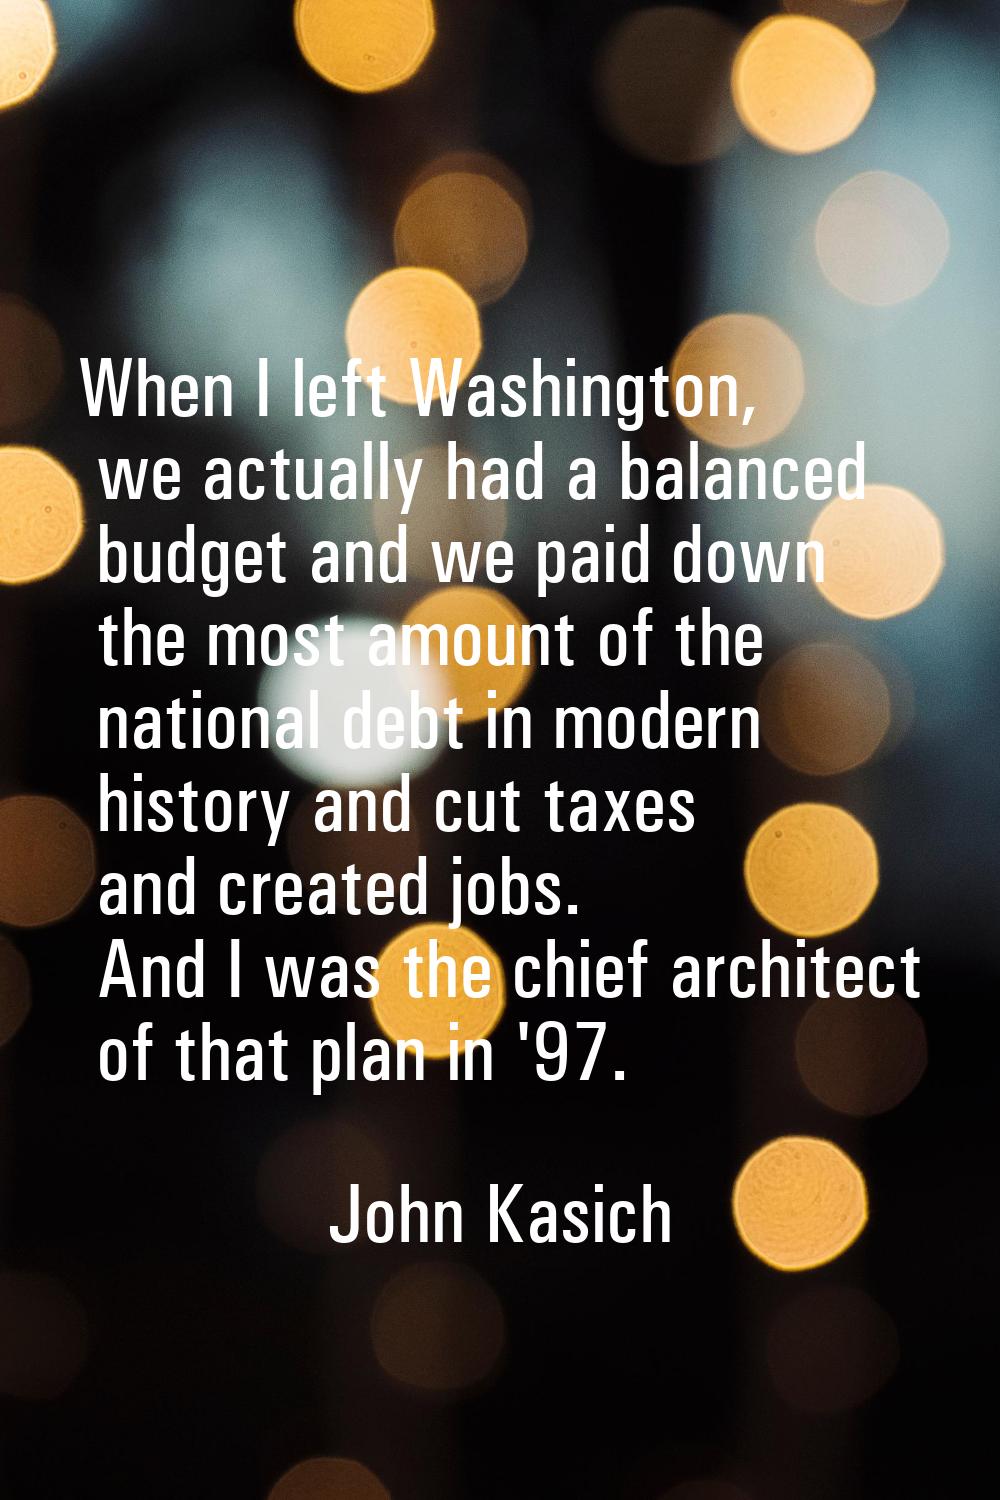 When I left Washington, we actually had a balanced budget and we paid down the most amount of the n